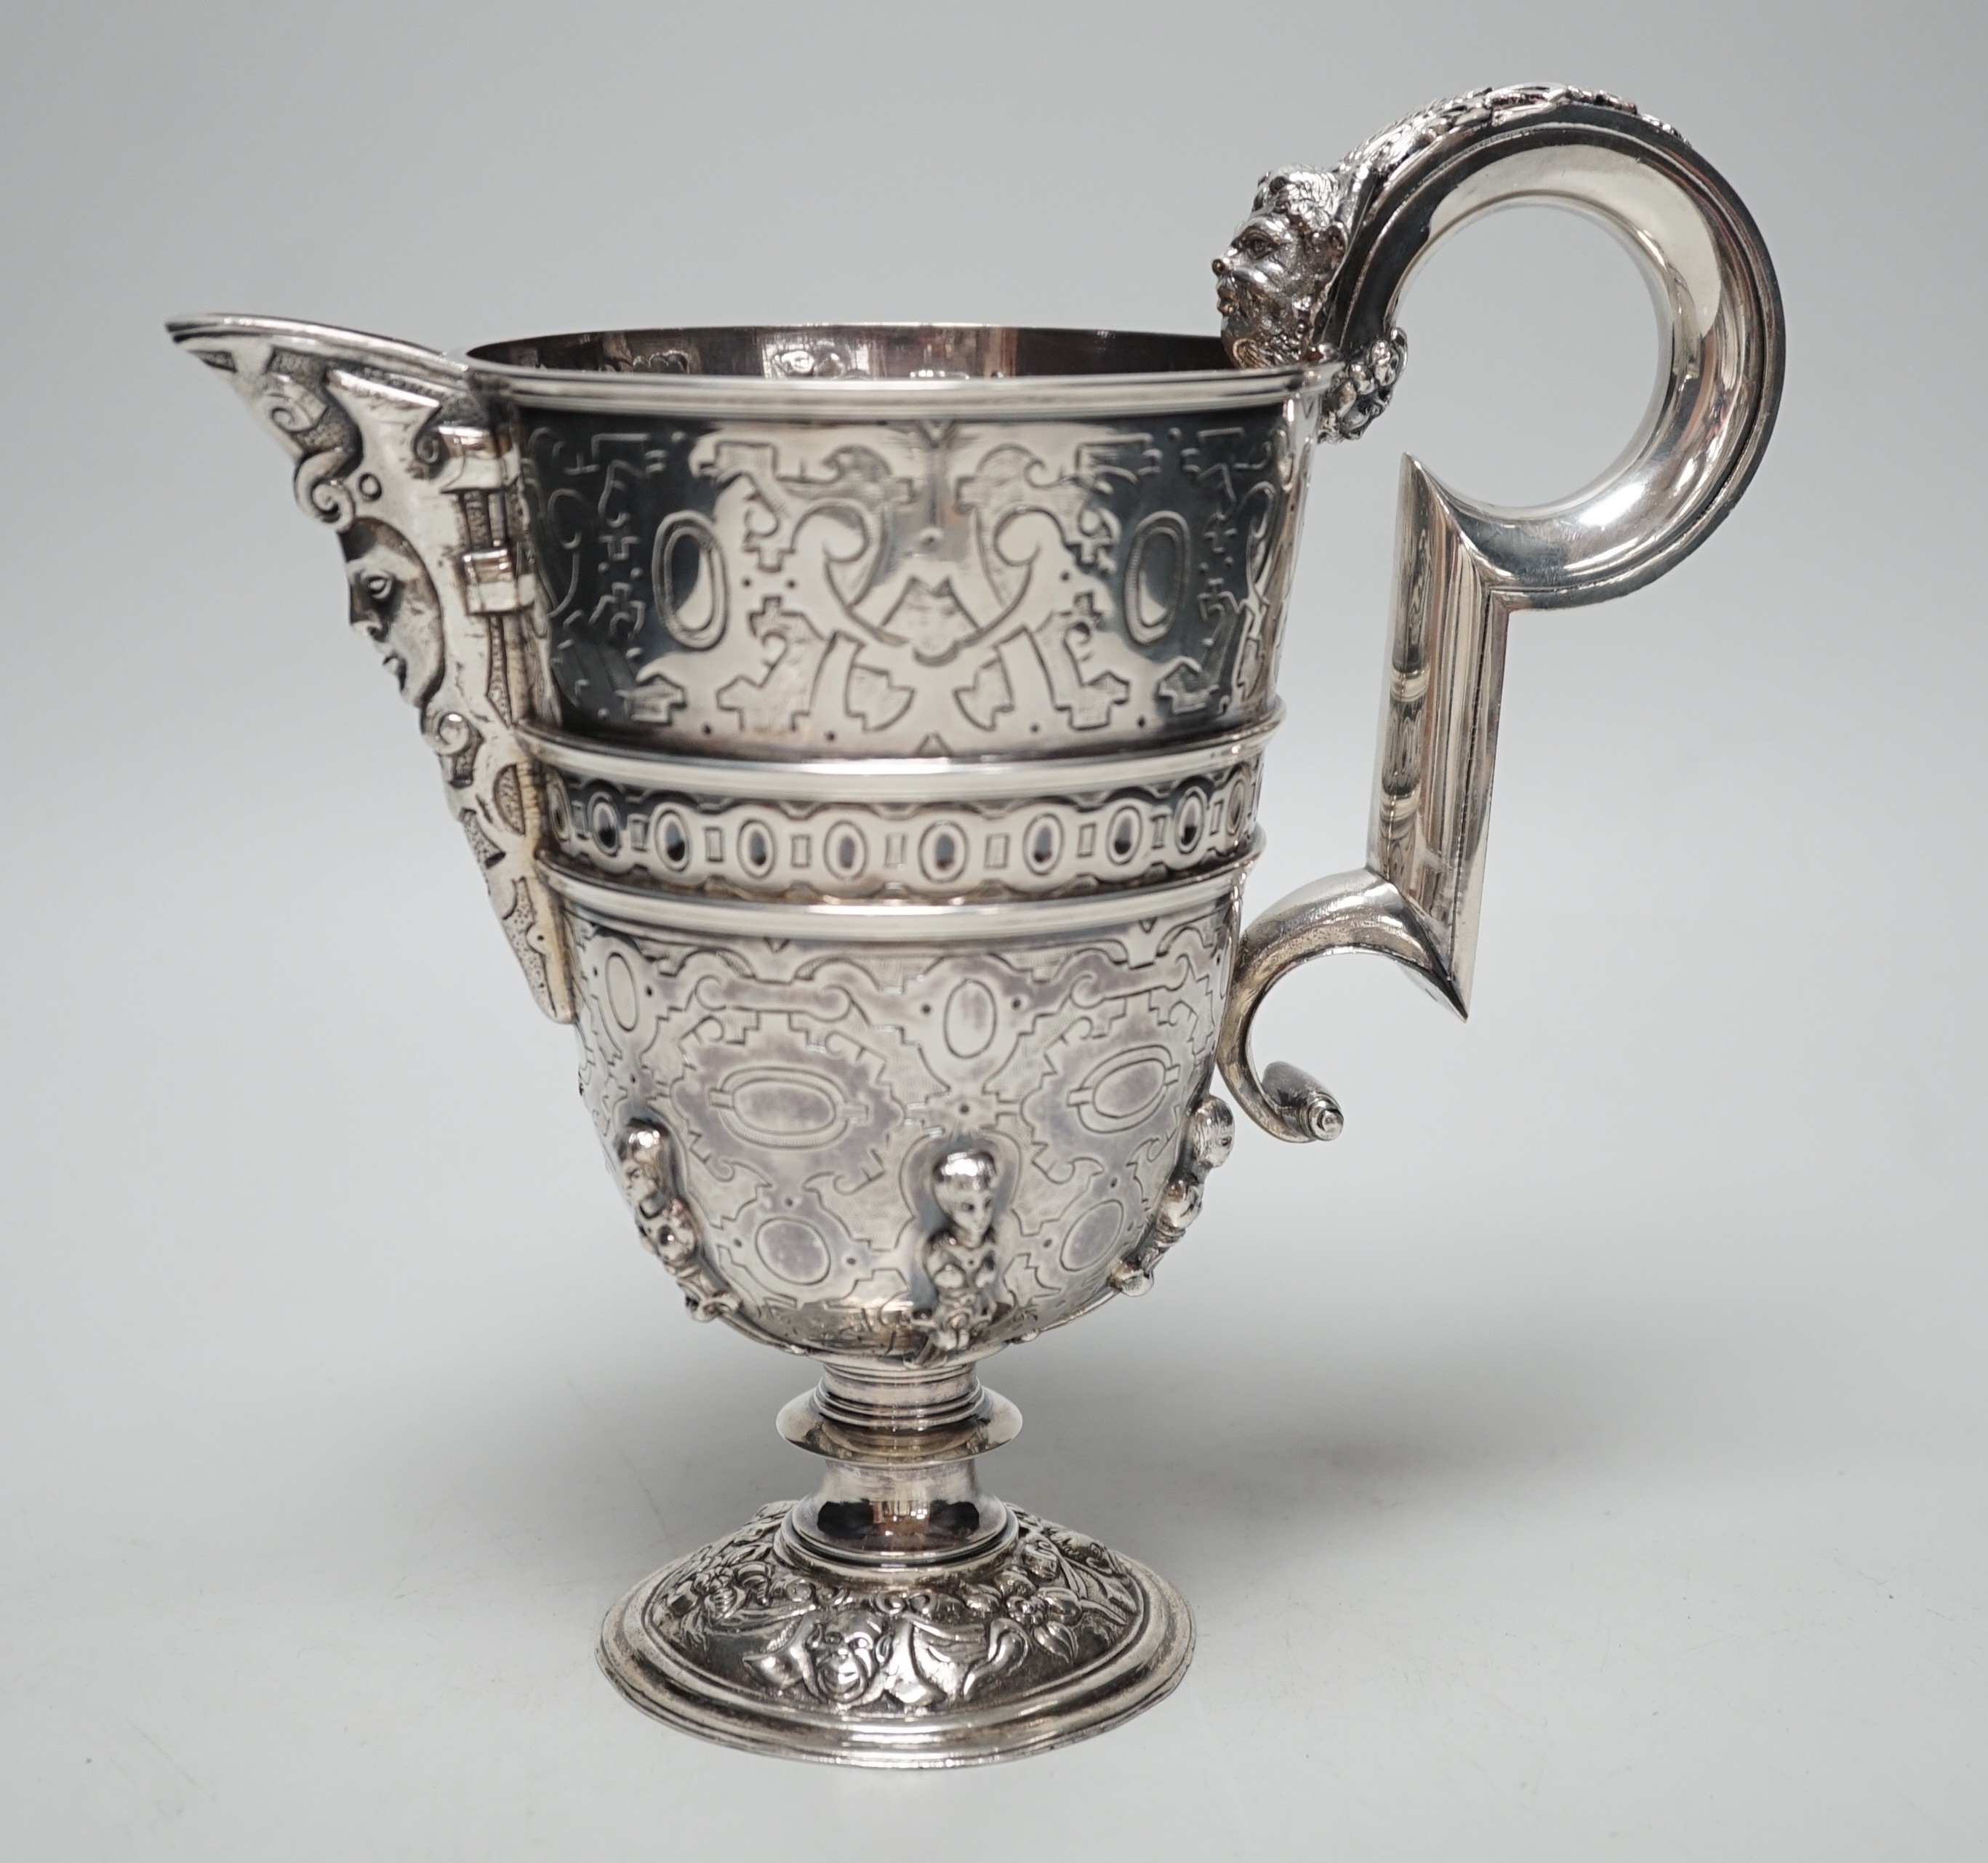 A mid 20th century Spanish? white metal ewer, with engraved, caryatid and mask decoration, height 22.2cm, 26.7oz.